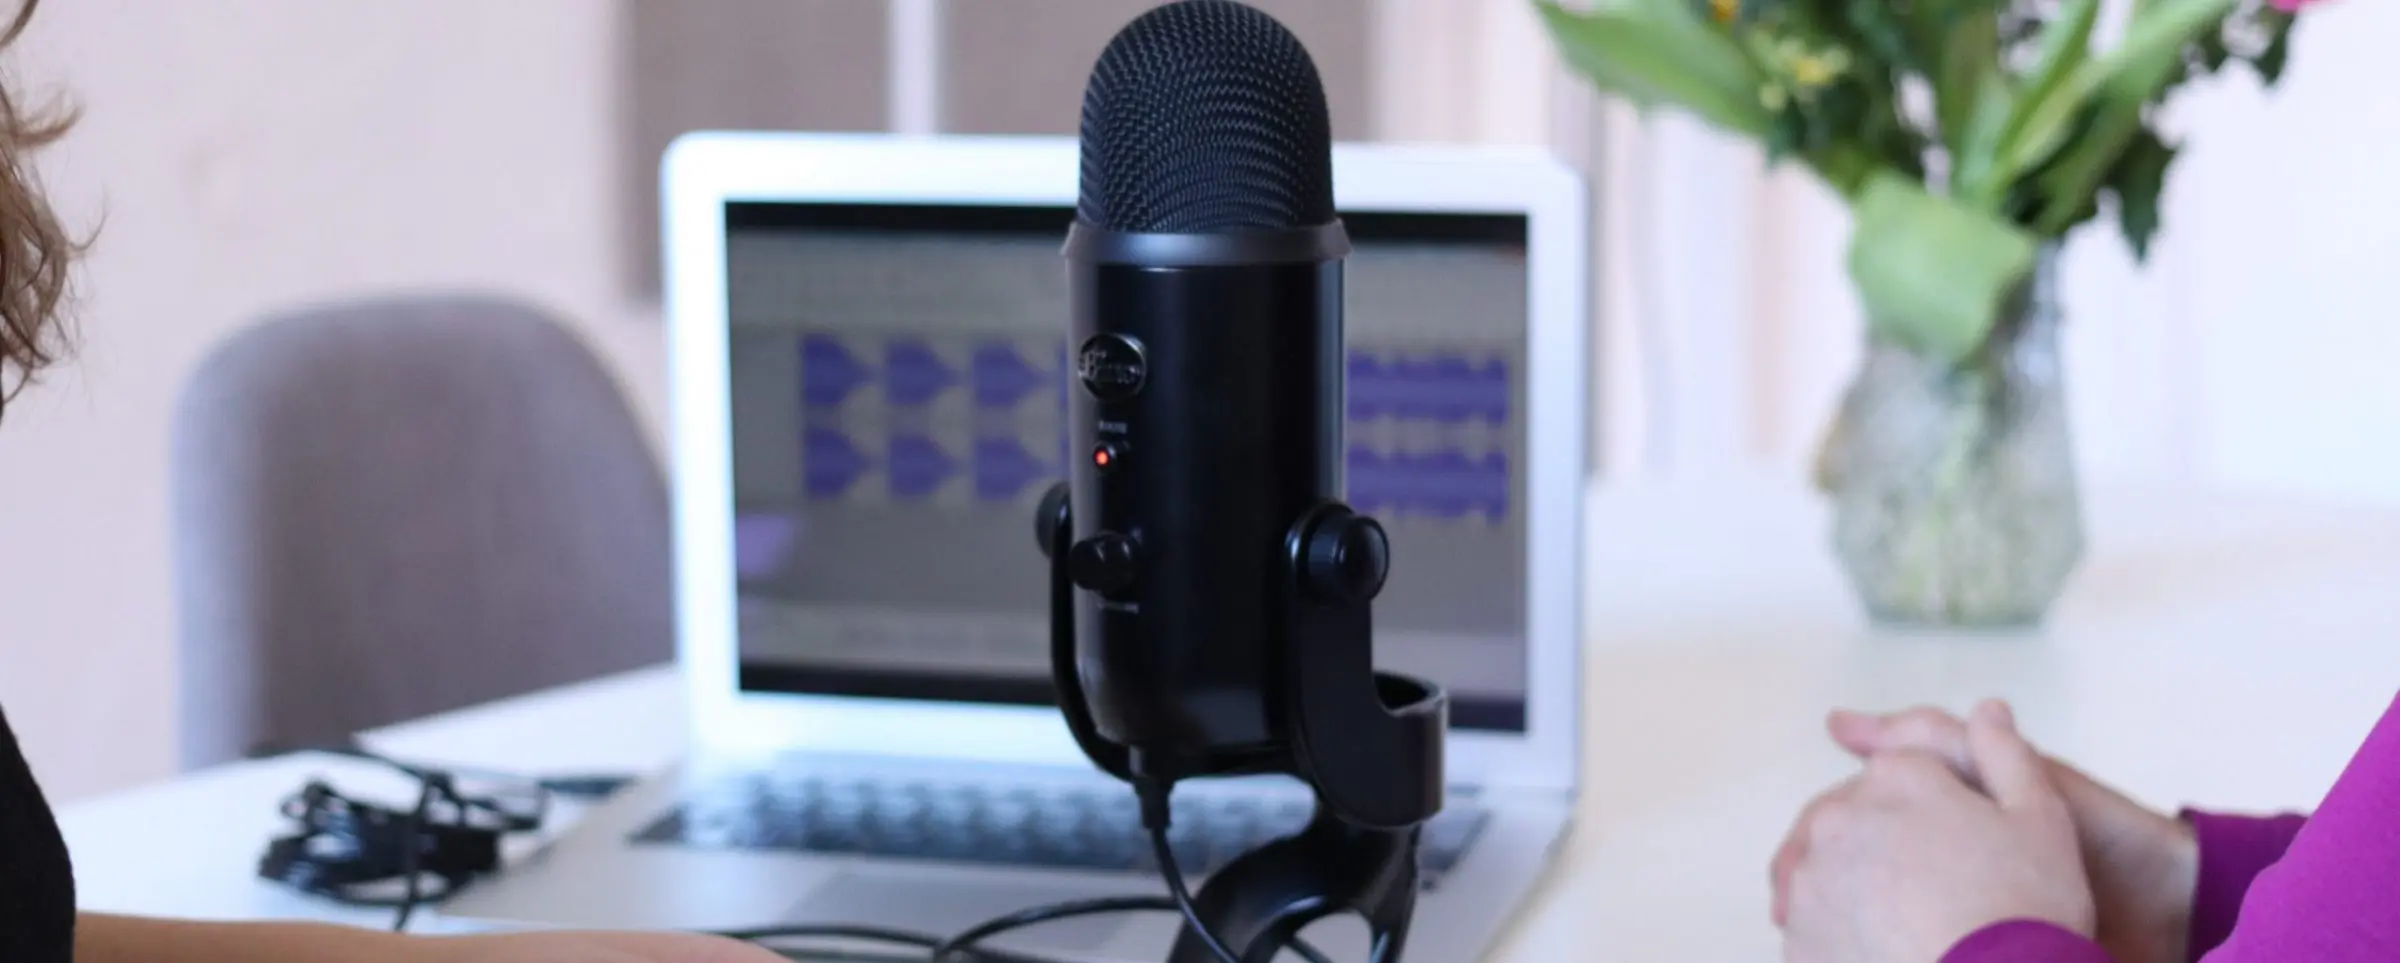 photo of microphone and a computer used for audio editing